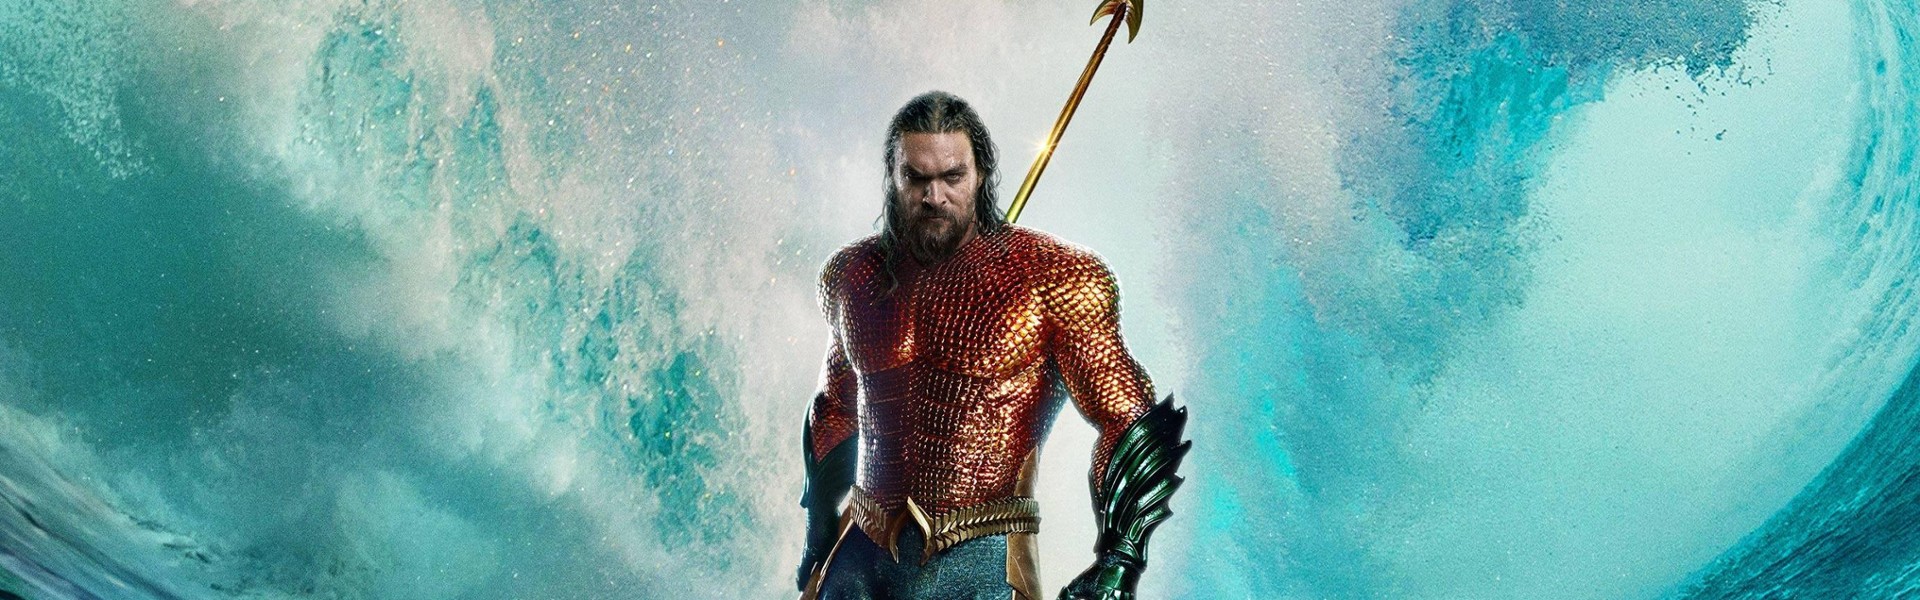 “Aquaman and the Lost Kingdom” Soon on Streaming. Release Date Known